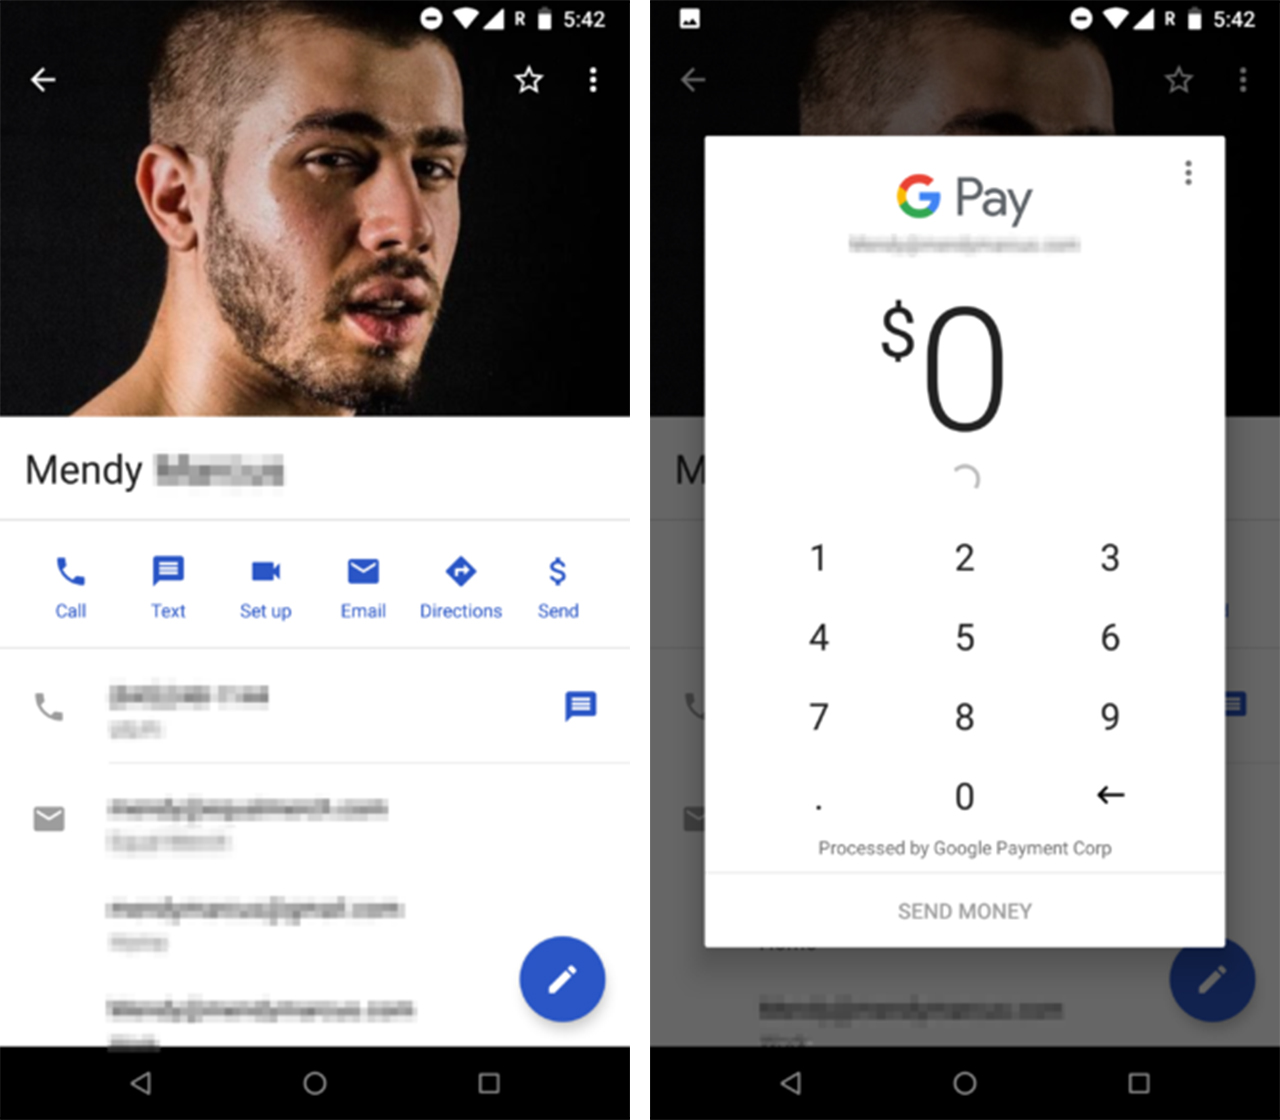 Screenshots from an <i>Android Police<i/> reader who has access to the new Google Pay features